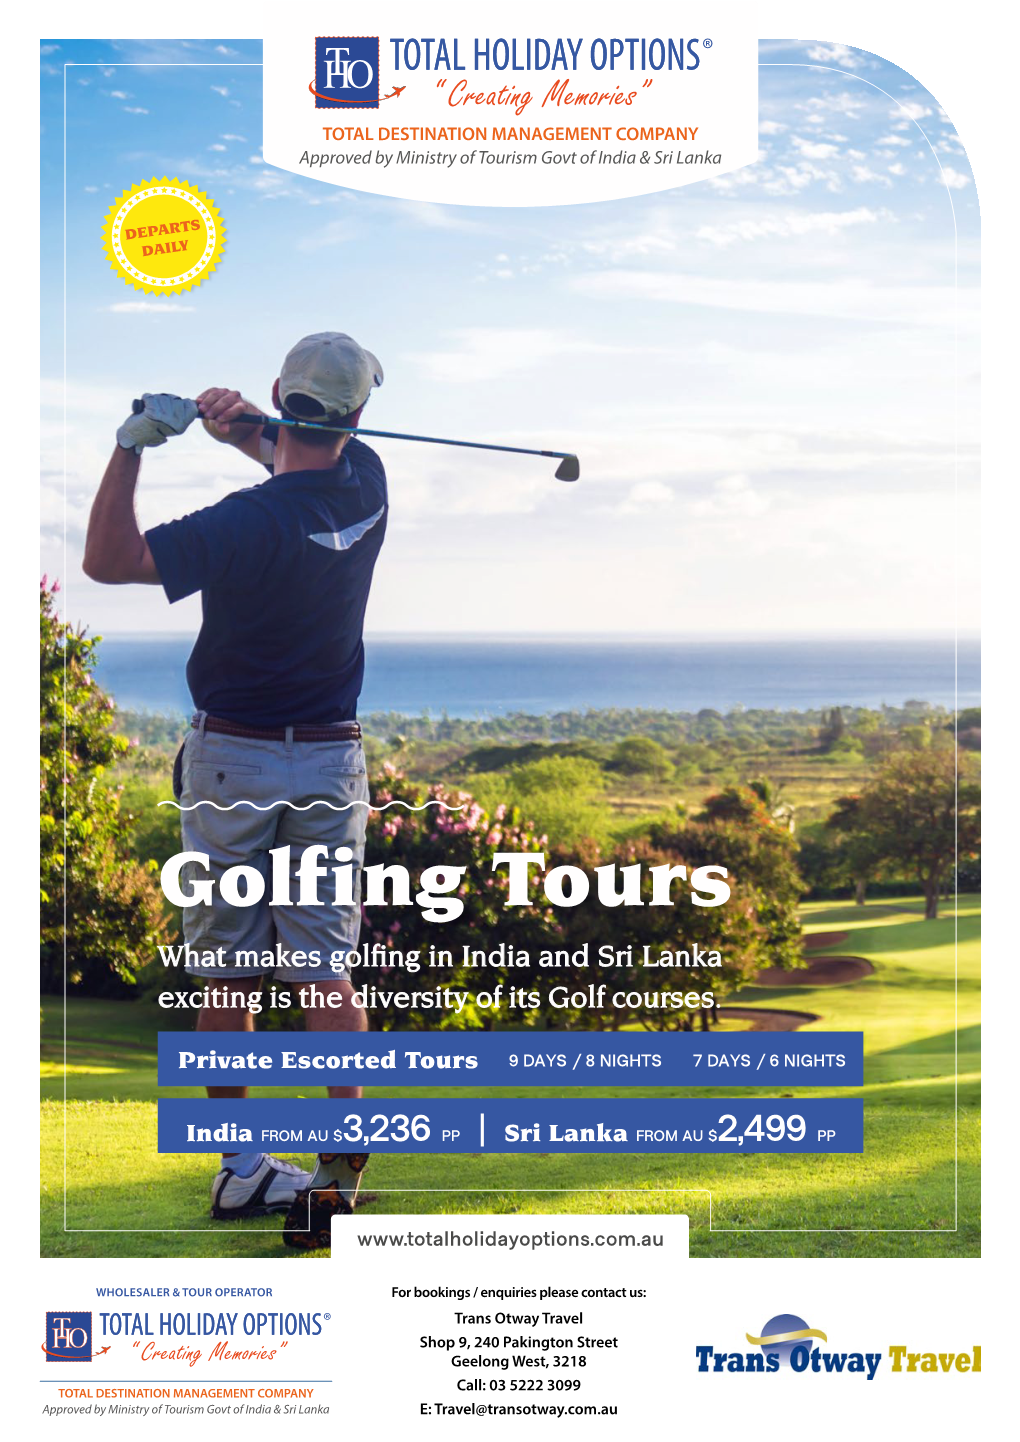 Golfing Tours What Makes Golfing in India and Sri Lanka Exciting Is the Diversity of Its Golf Courses